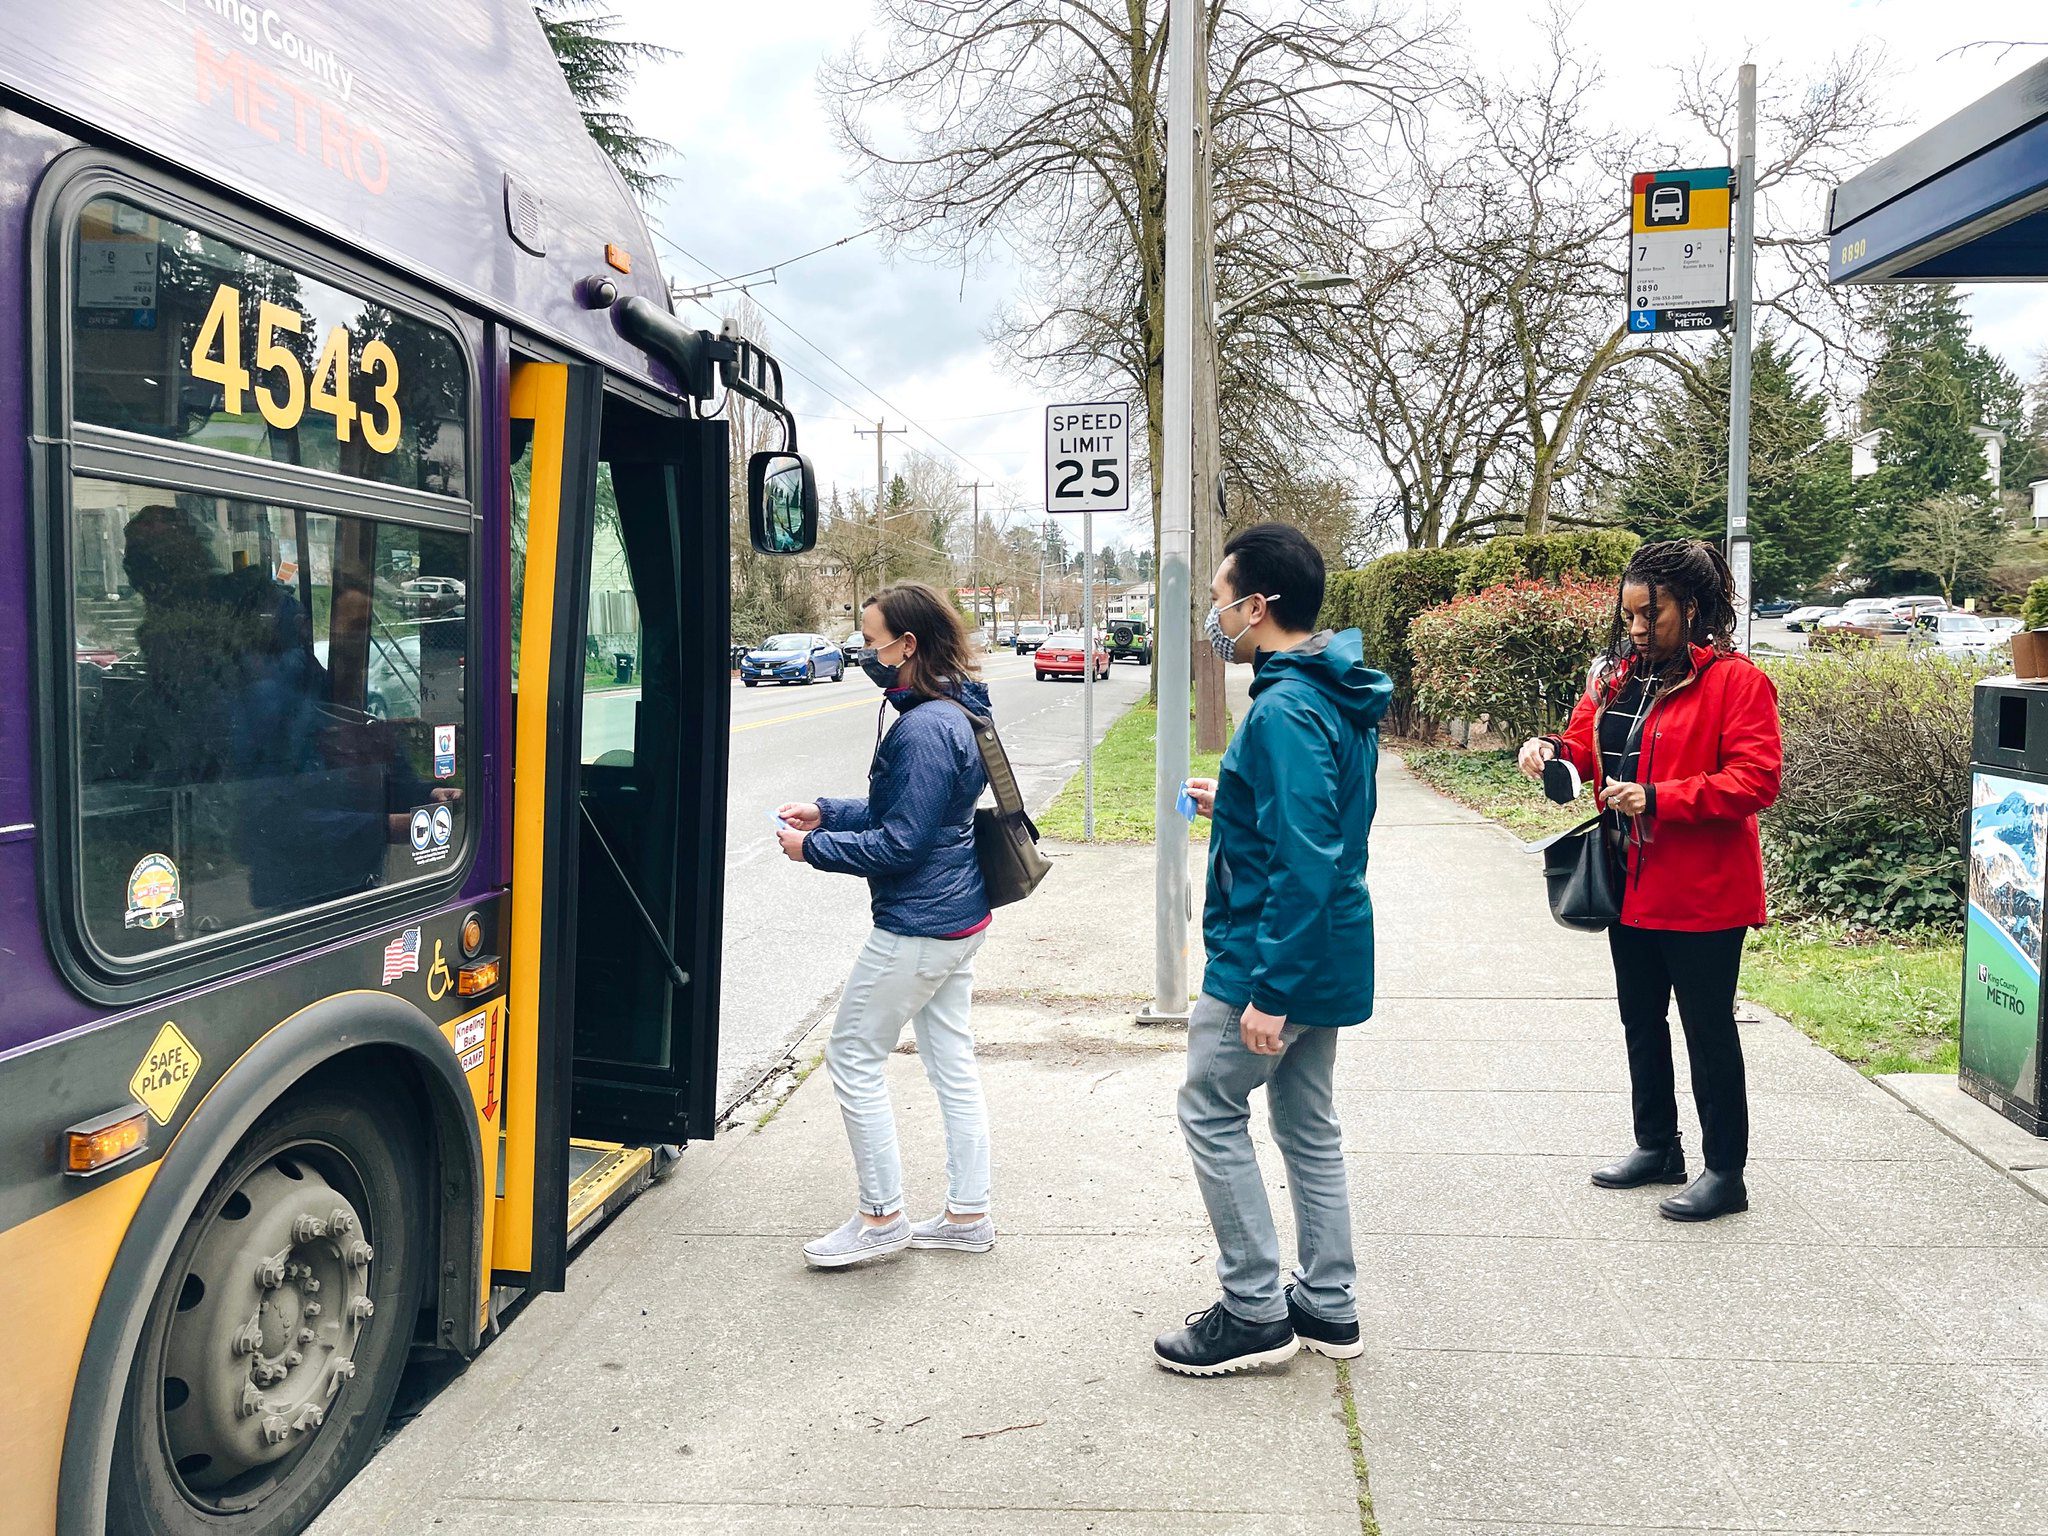 Three people get ready to board a King County Metro bus in southeast Seattle. The bus is on the left side of the photo with its doors open, and the people in the middle and right side of the photo, preparing to board.